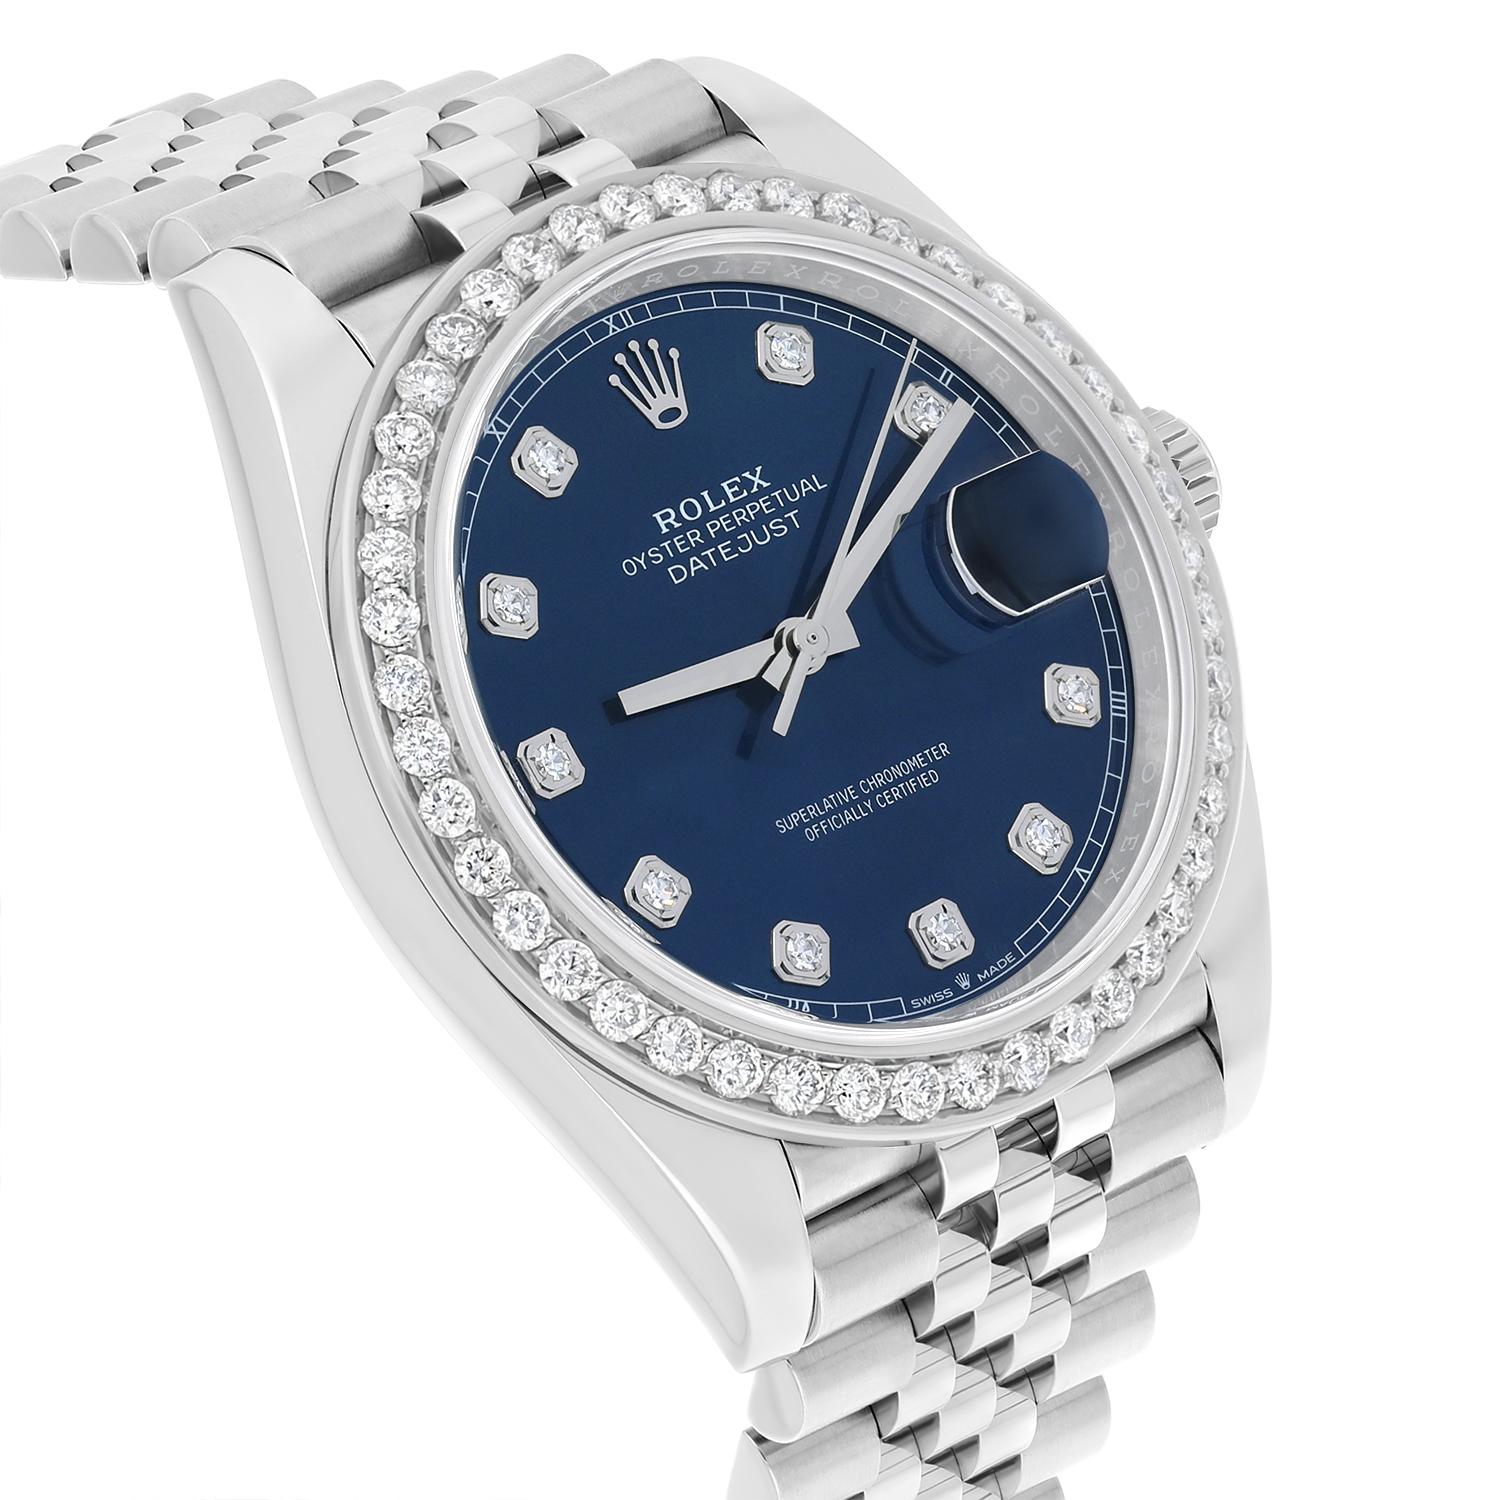 Rolex Datejust 41 Steel & 18k WG Blue Diamond Dial Diamond Bezel 126334 In New Condition For Sale In New York, NY